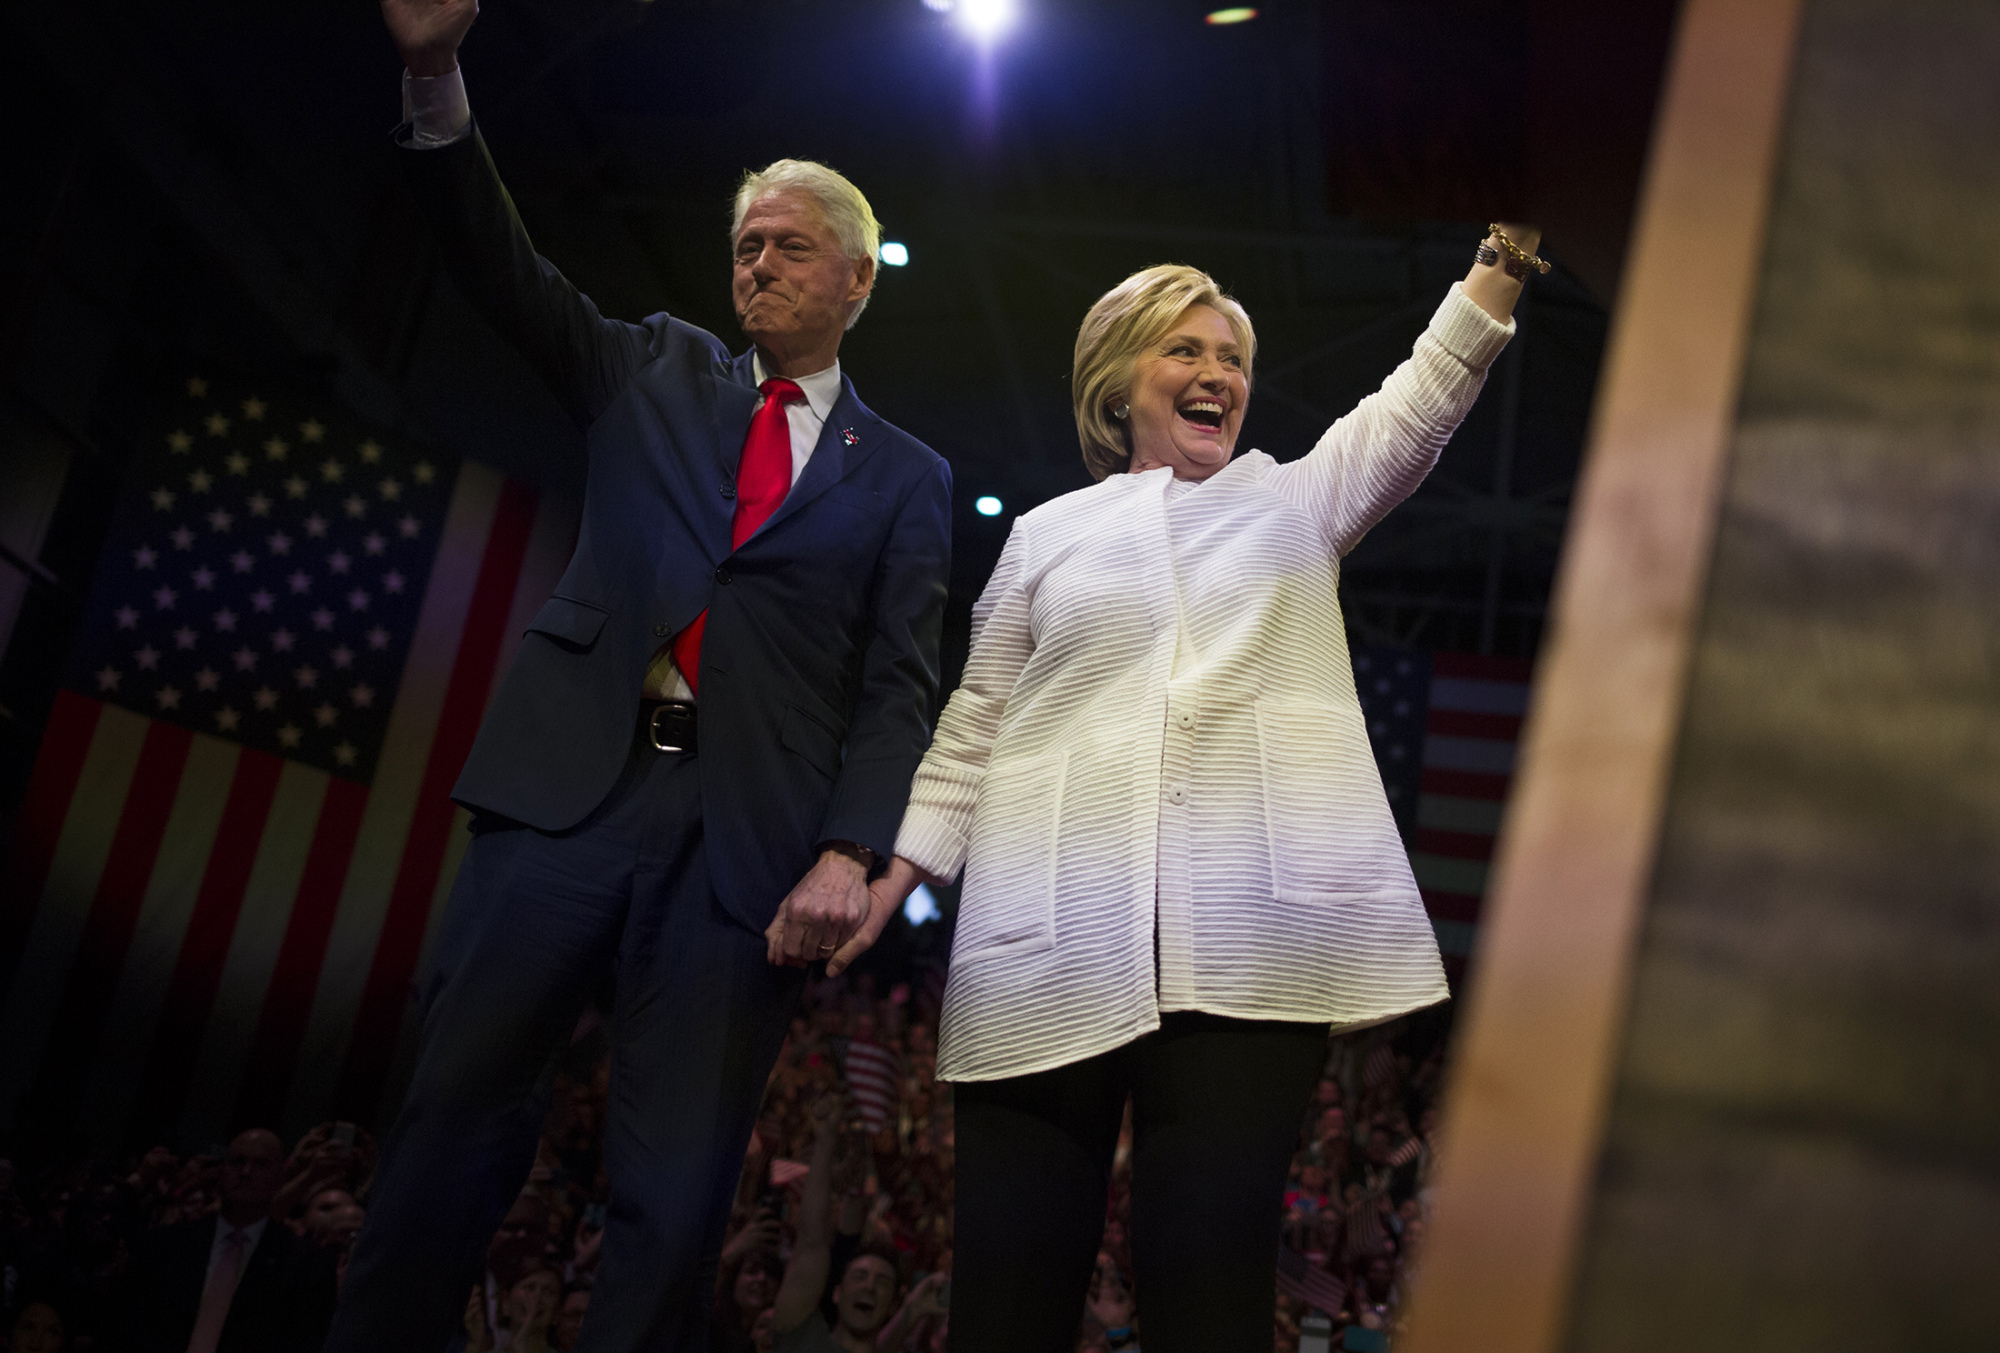 Hillary and Bill Clinton wave to supporters during a primary night event at the Brooklyn Navy Yard in the Brooklyn borough of New York, on June 7, 2016.
